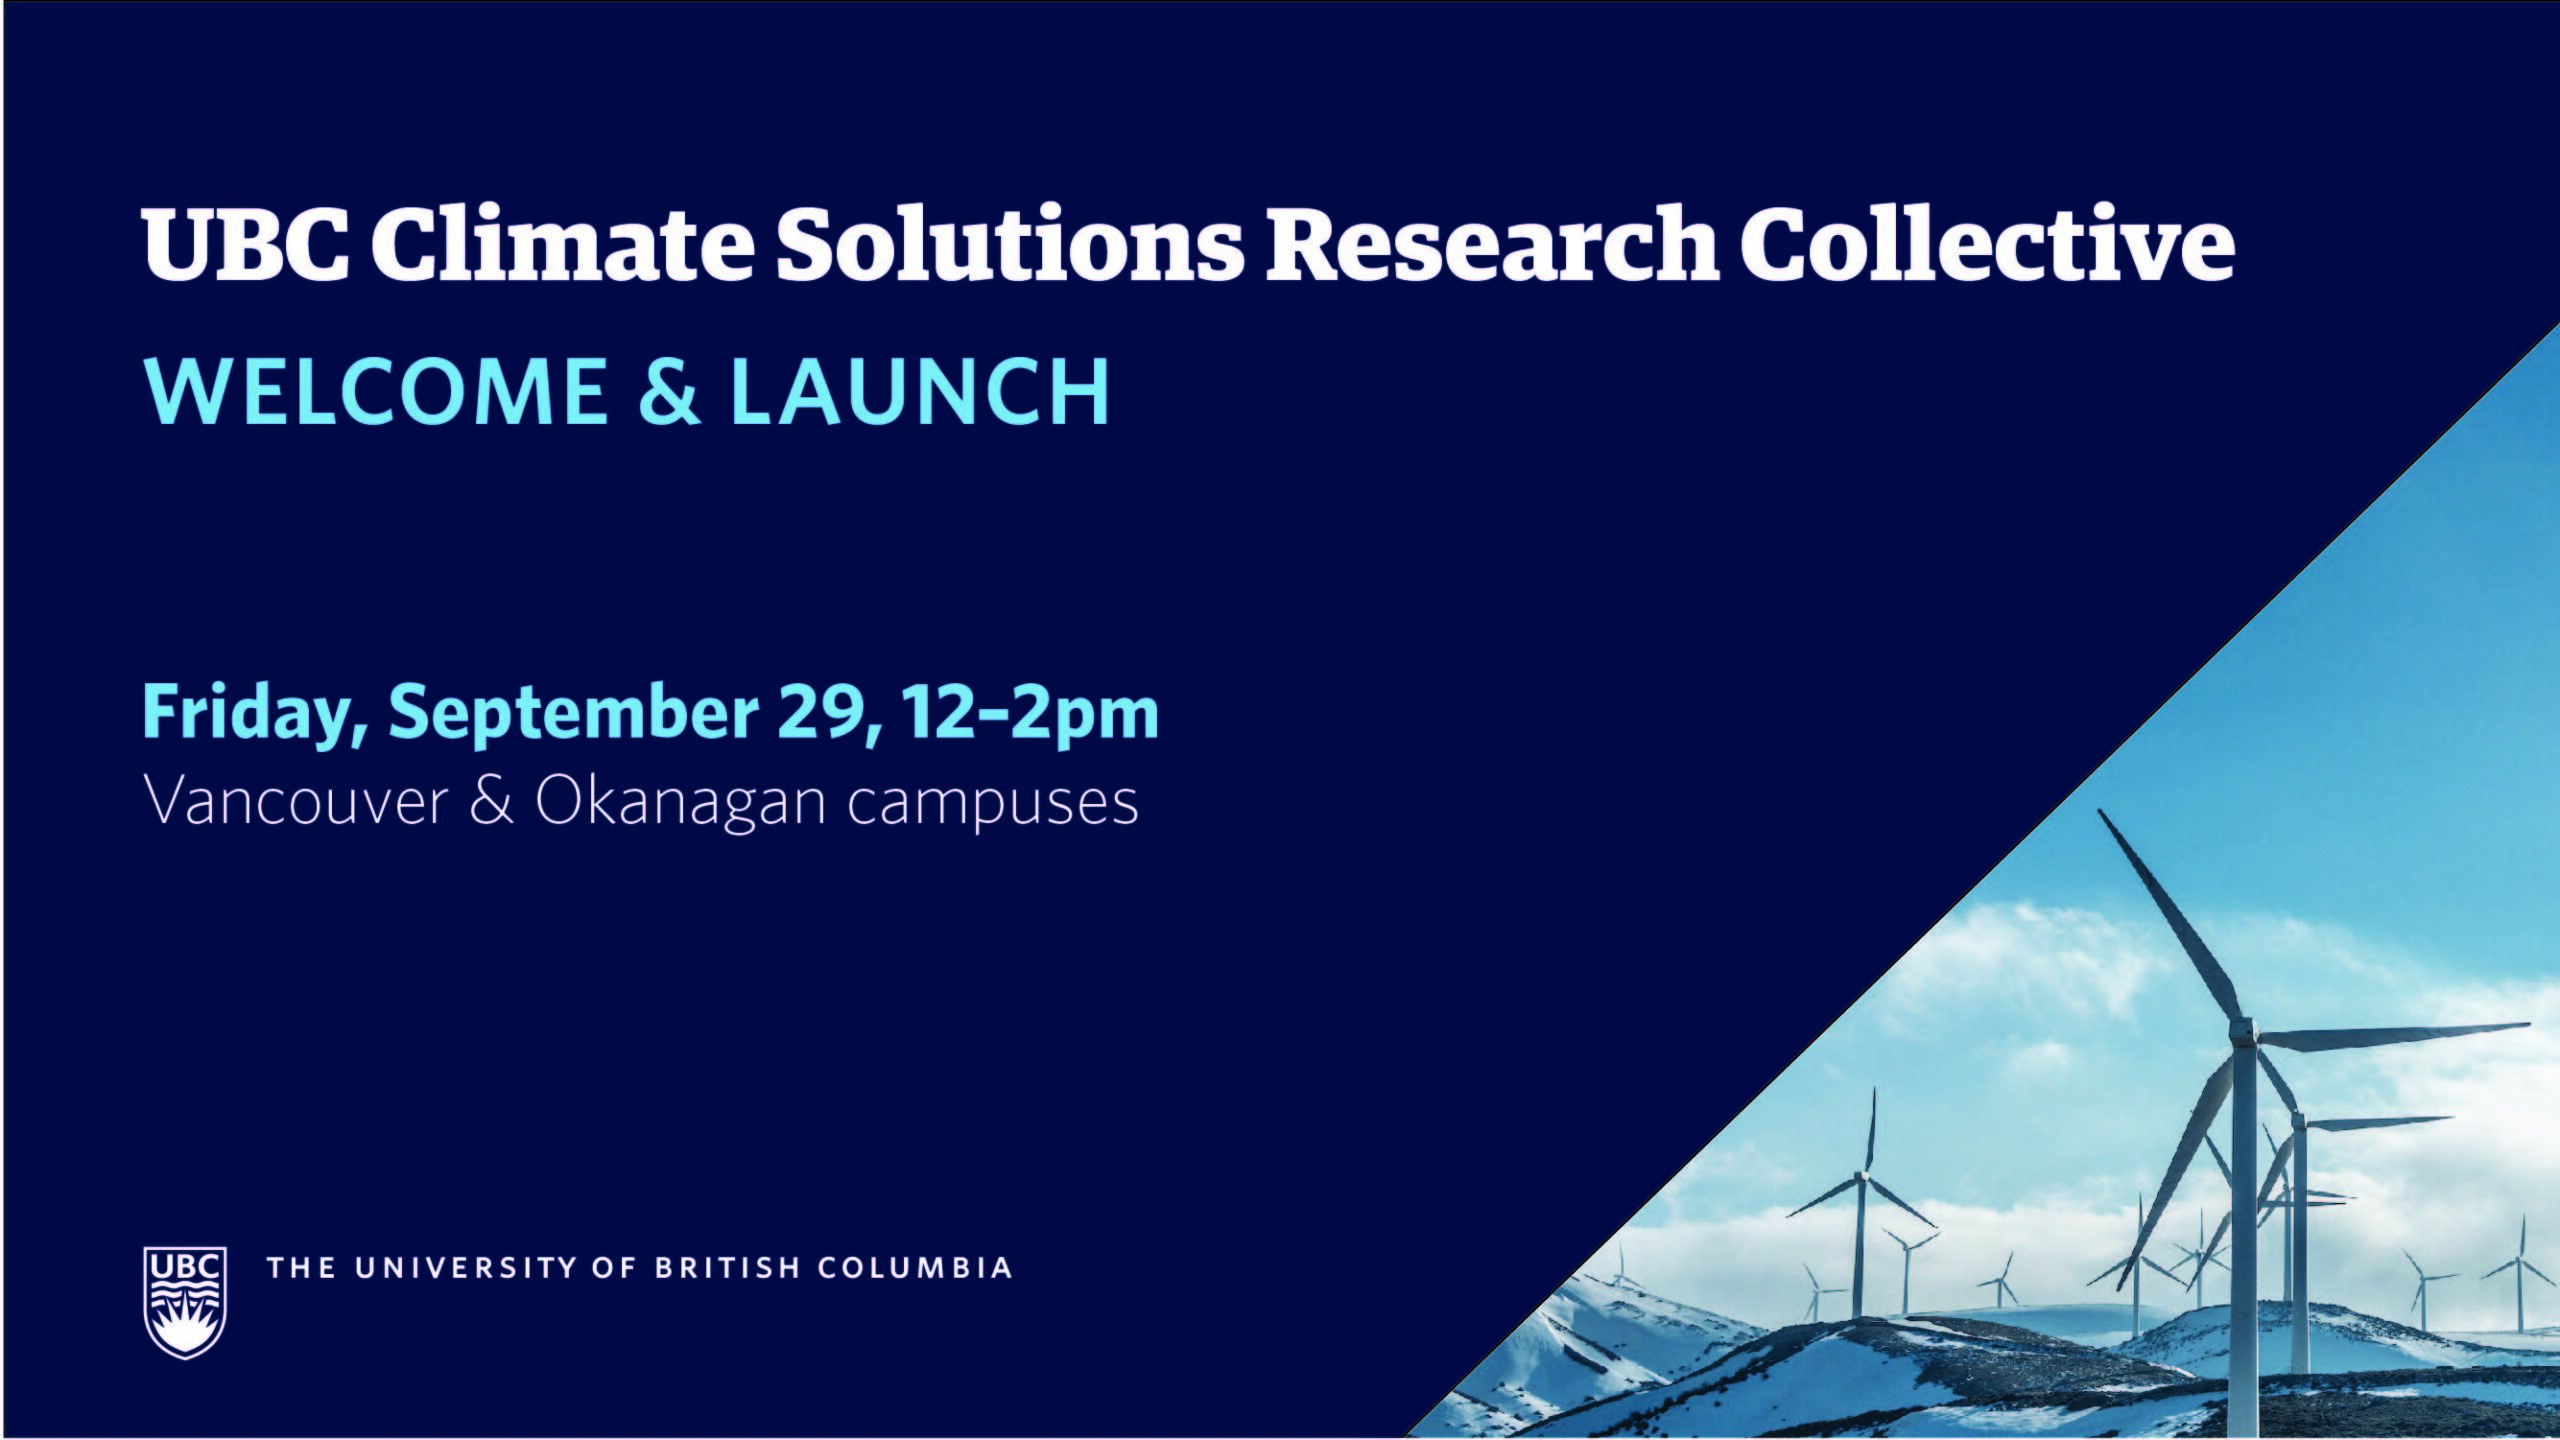 UBC Climate Solutions research Collective Welcome and Launch on September 29, 12-2pm written on blue background with wind turbines shown in bottom right corner